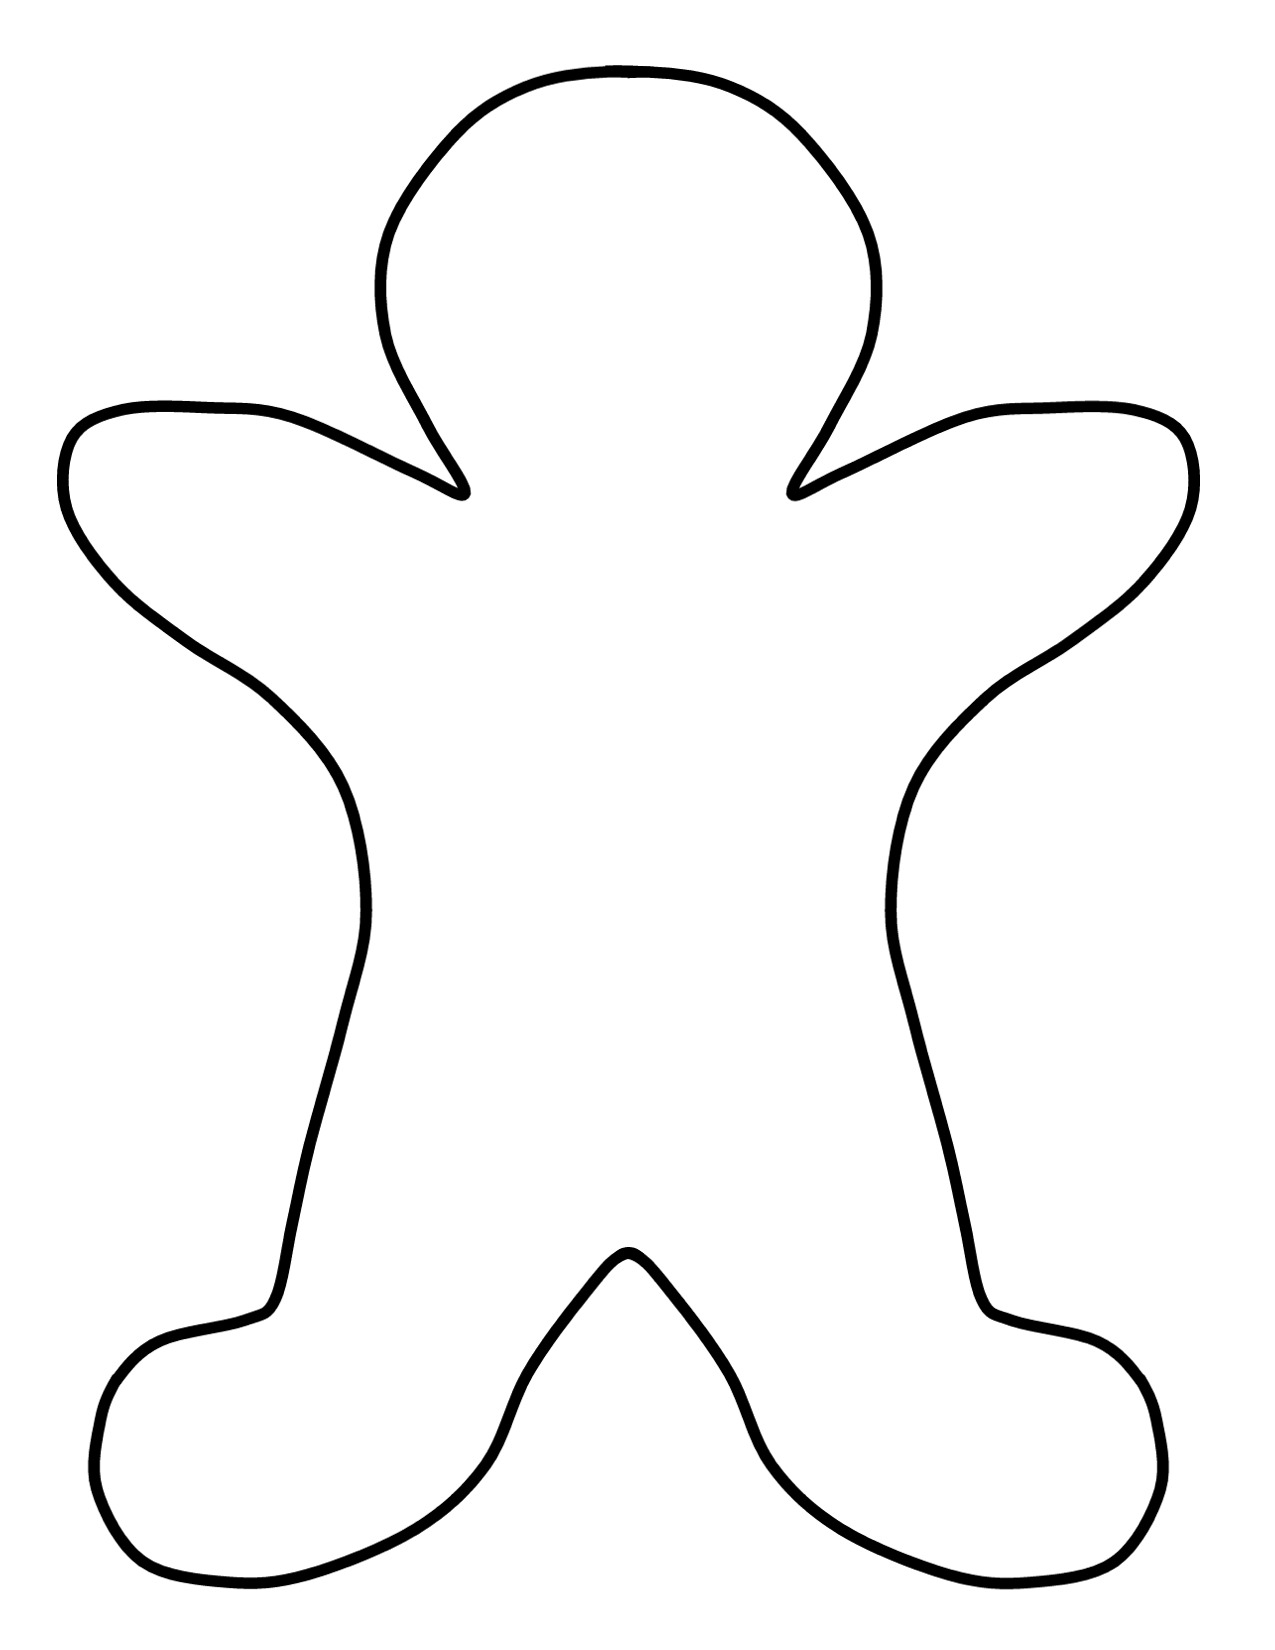 Gingerbread man clip art free free clipart images 3